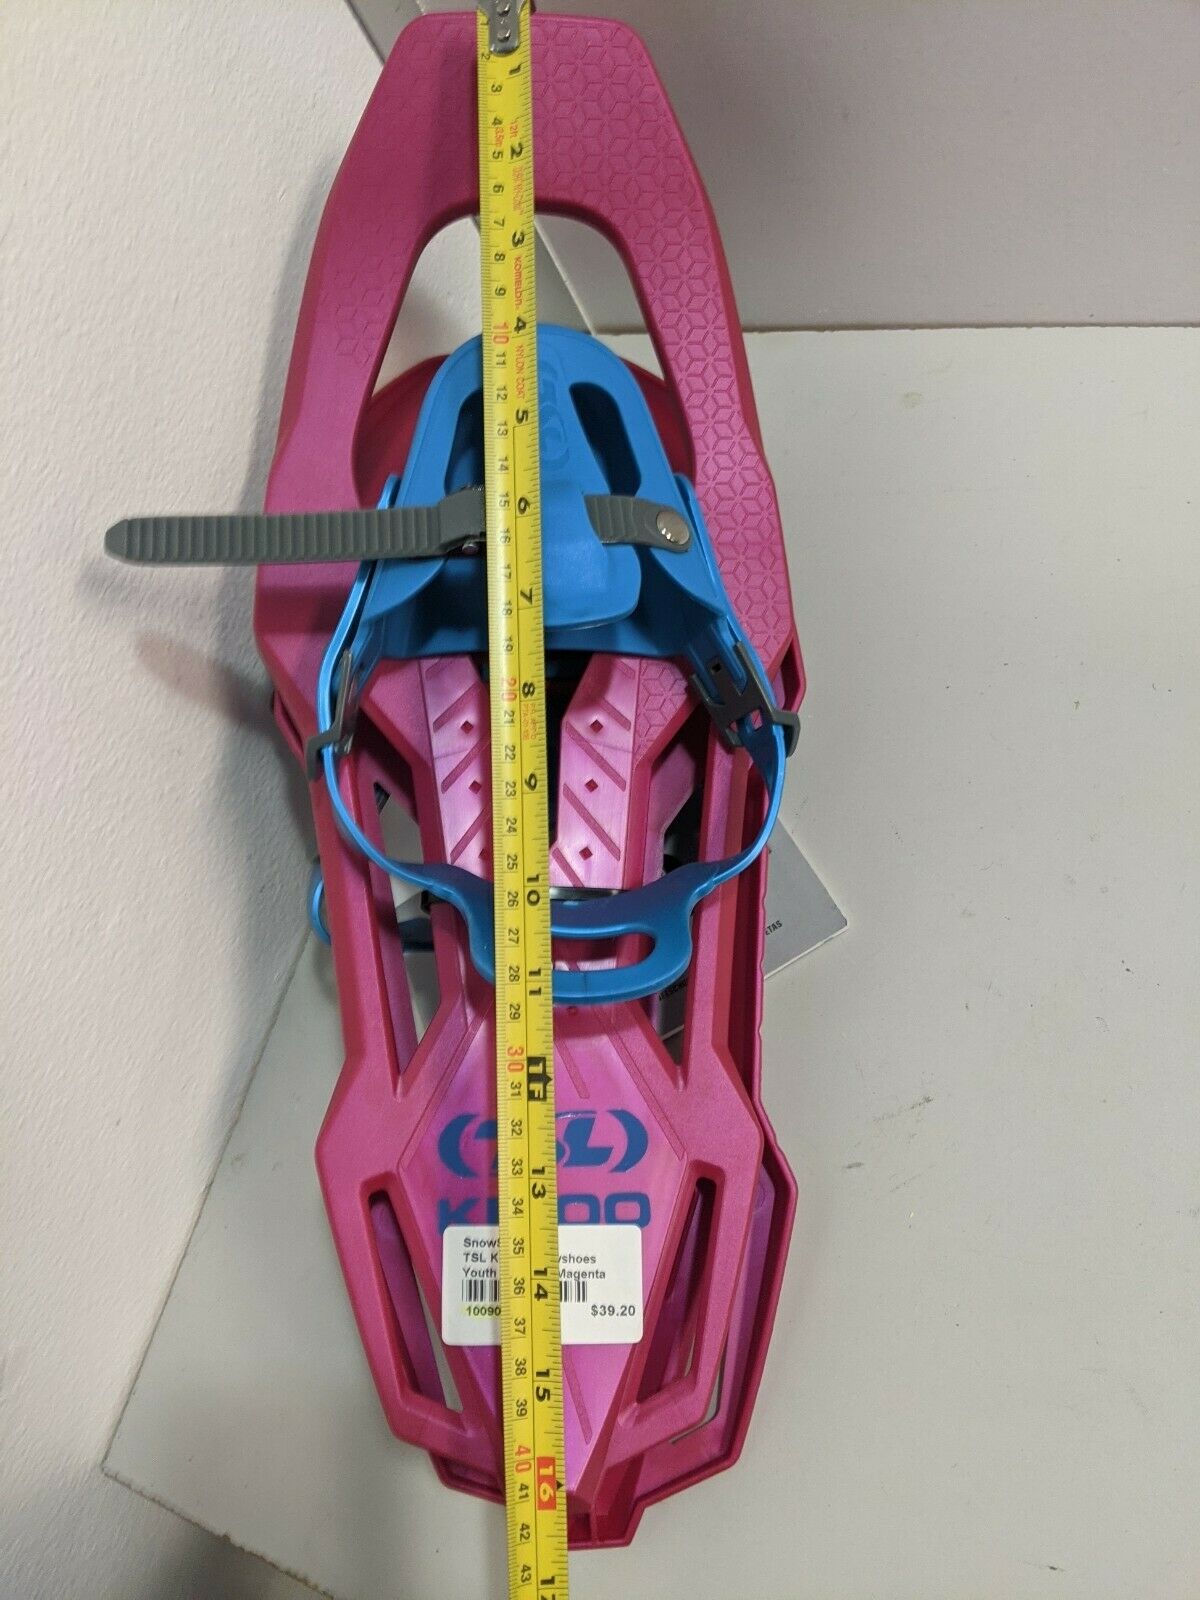 TSL Kidoo Snow Shoes 17-in Color Magenta Youth Kids New Without Bag, Shoe Size Girls 12.5 - 4 Boy, 65LB Max, 30 LB Min